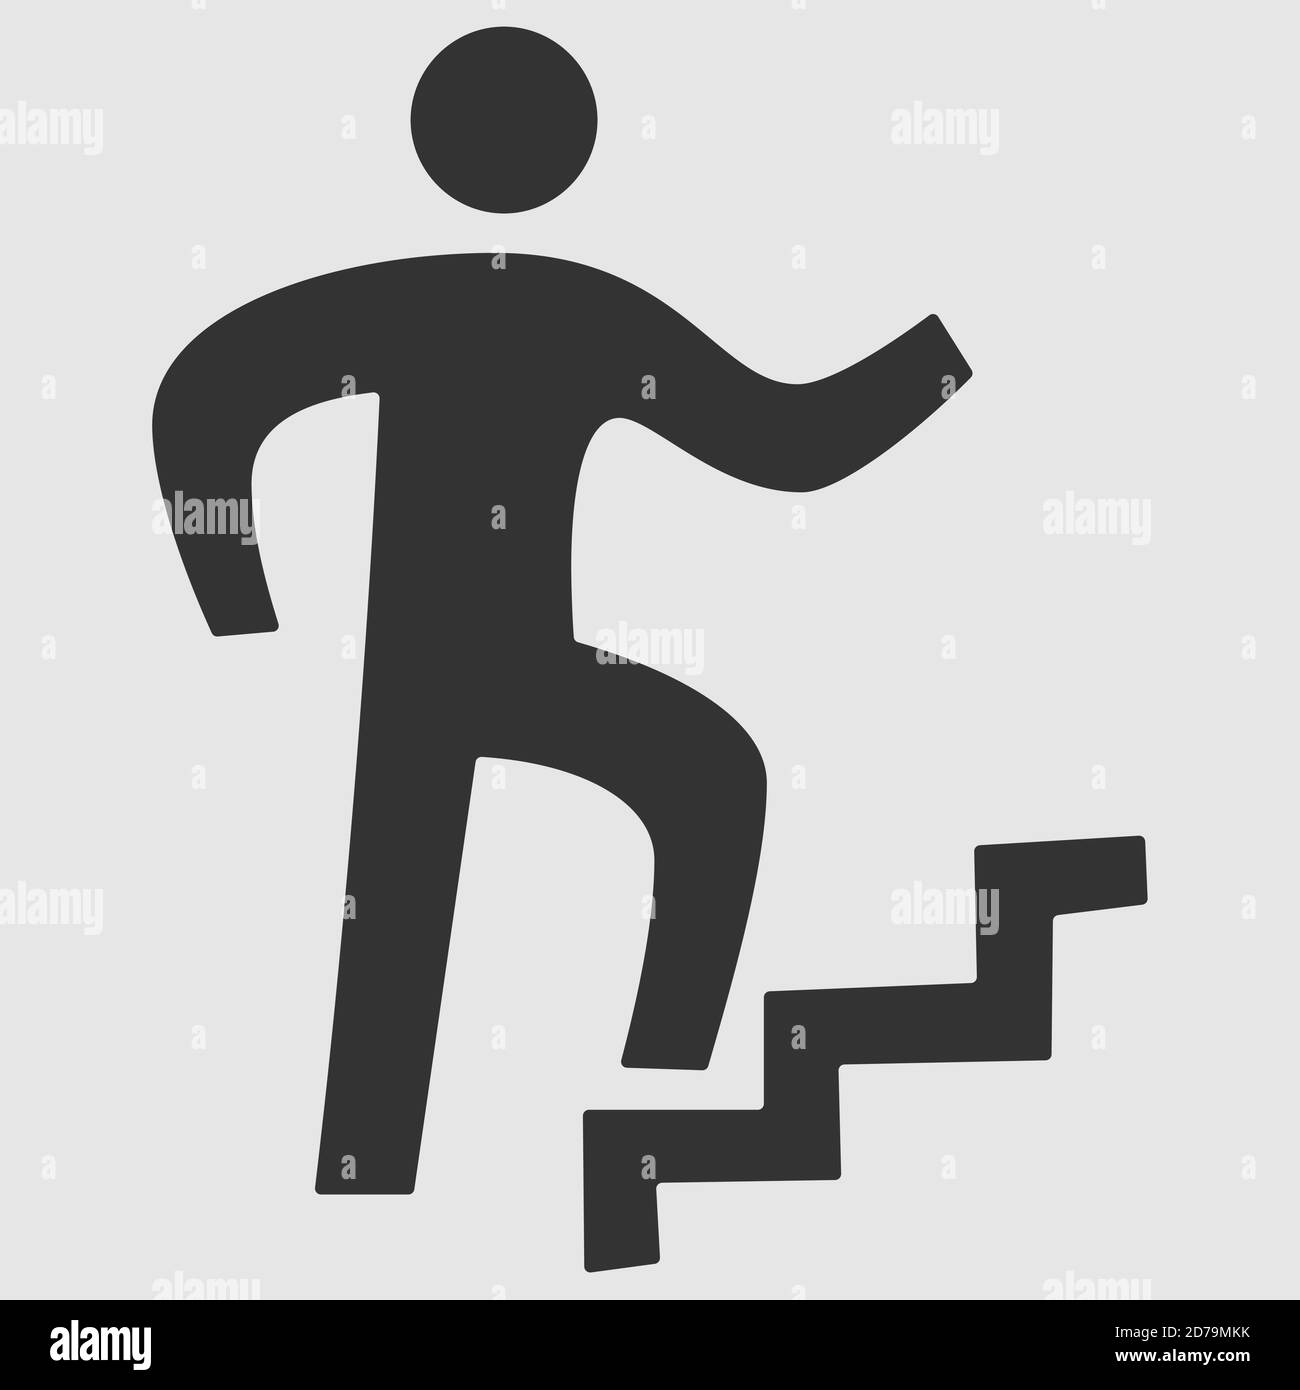 Climbing Stairs Vector or Illustration Stock Vector